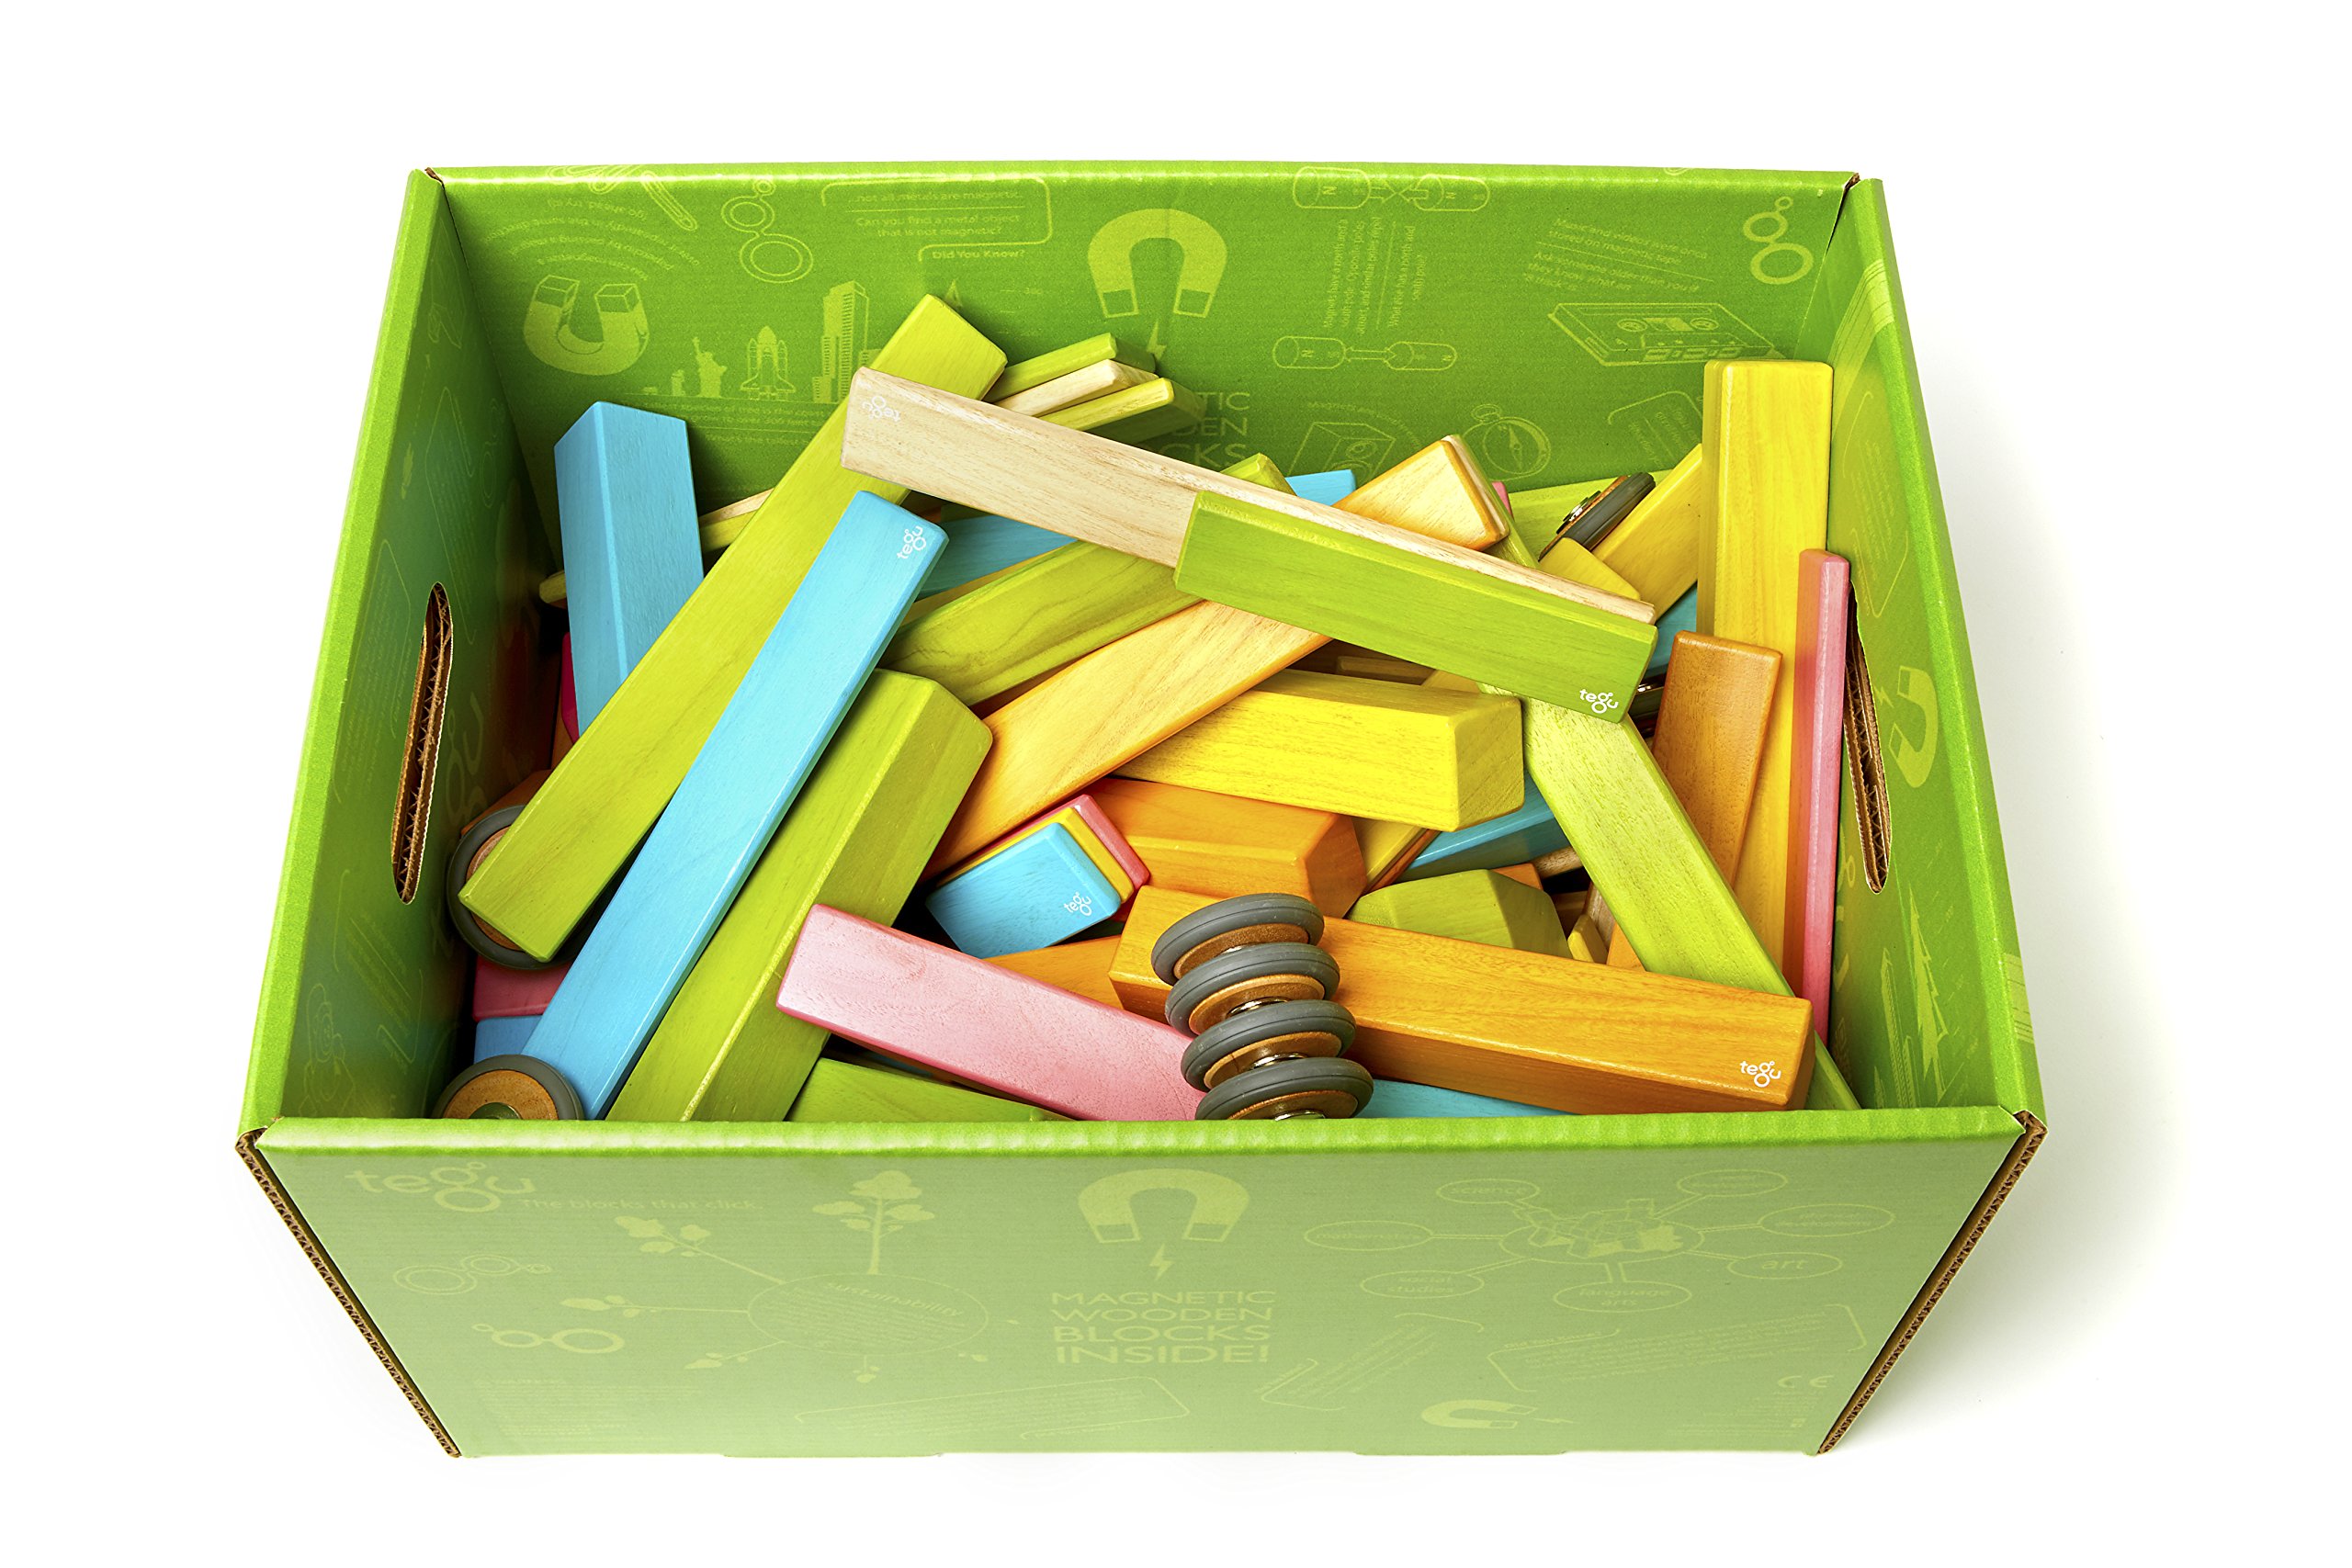 130 Piece Tegu Classroom Magnetic Wooden Block Set, Tints, 1-99 years old